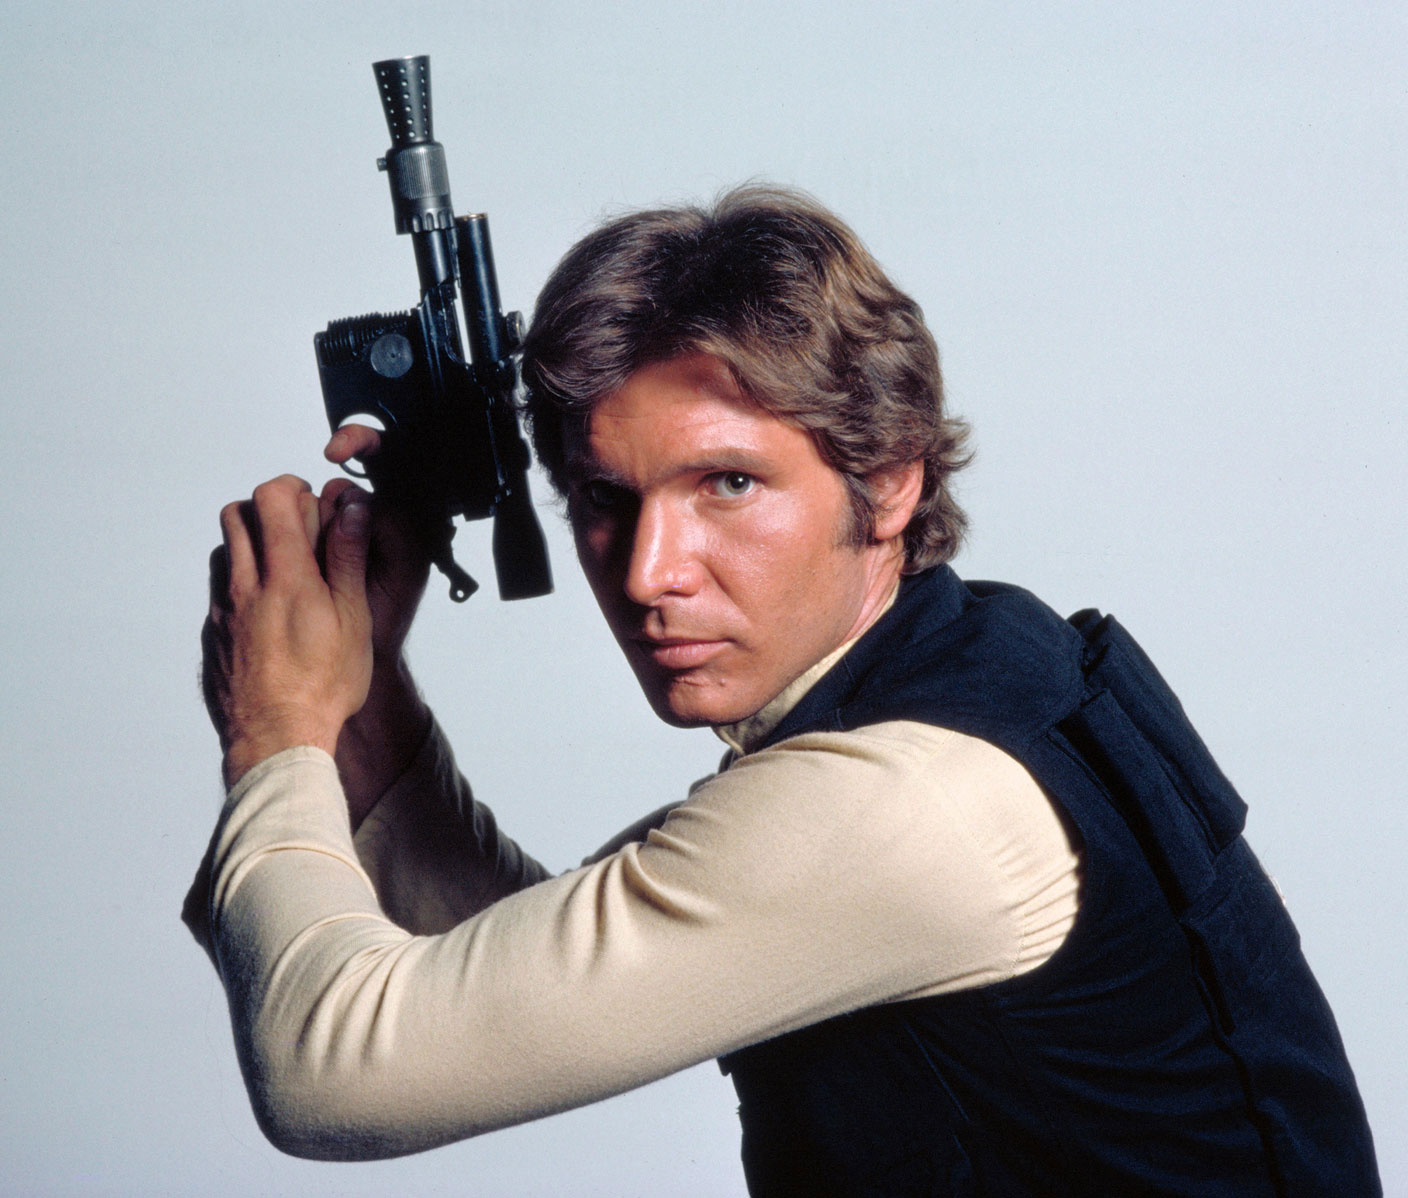 han-solo-with-blaster.jpg